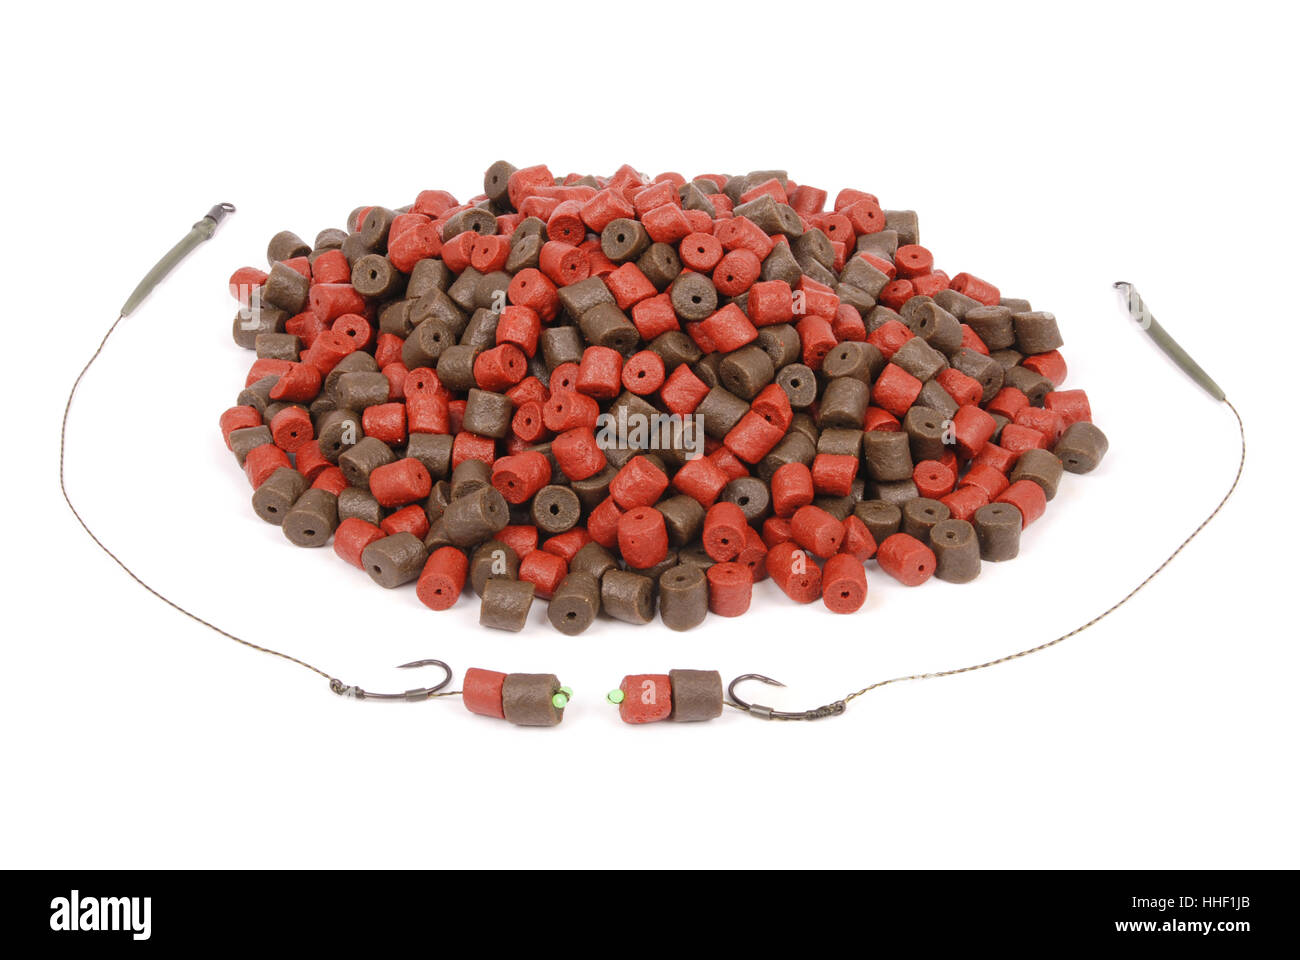 https://c8.alamy.com/comp/HHF1JB/fishing-bait-with-hook-and-brown-with-red-pre-drilled-halibut-pellets-HHF1JB.jpg